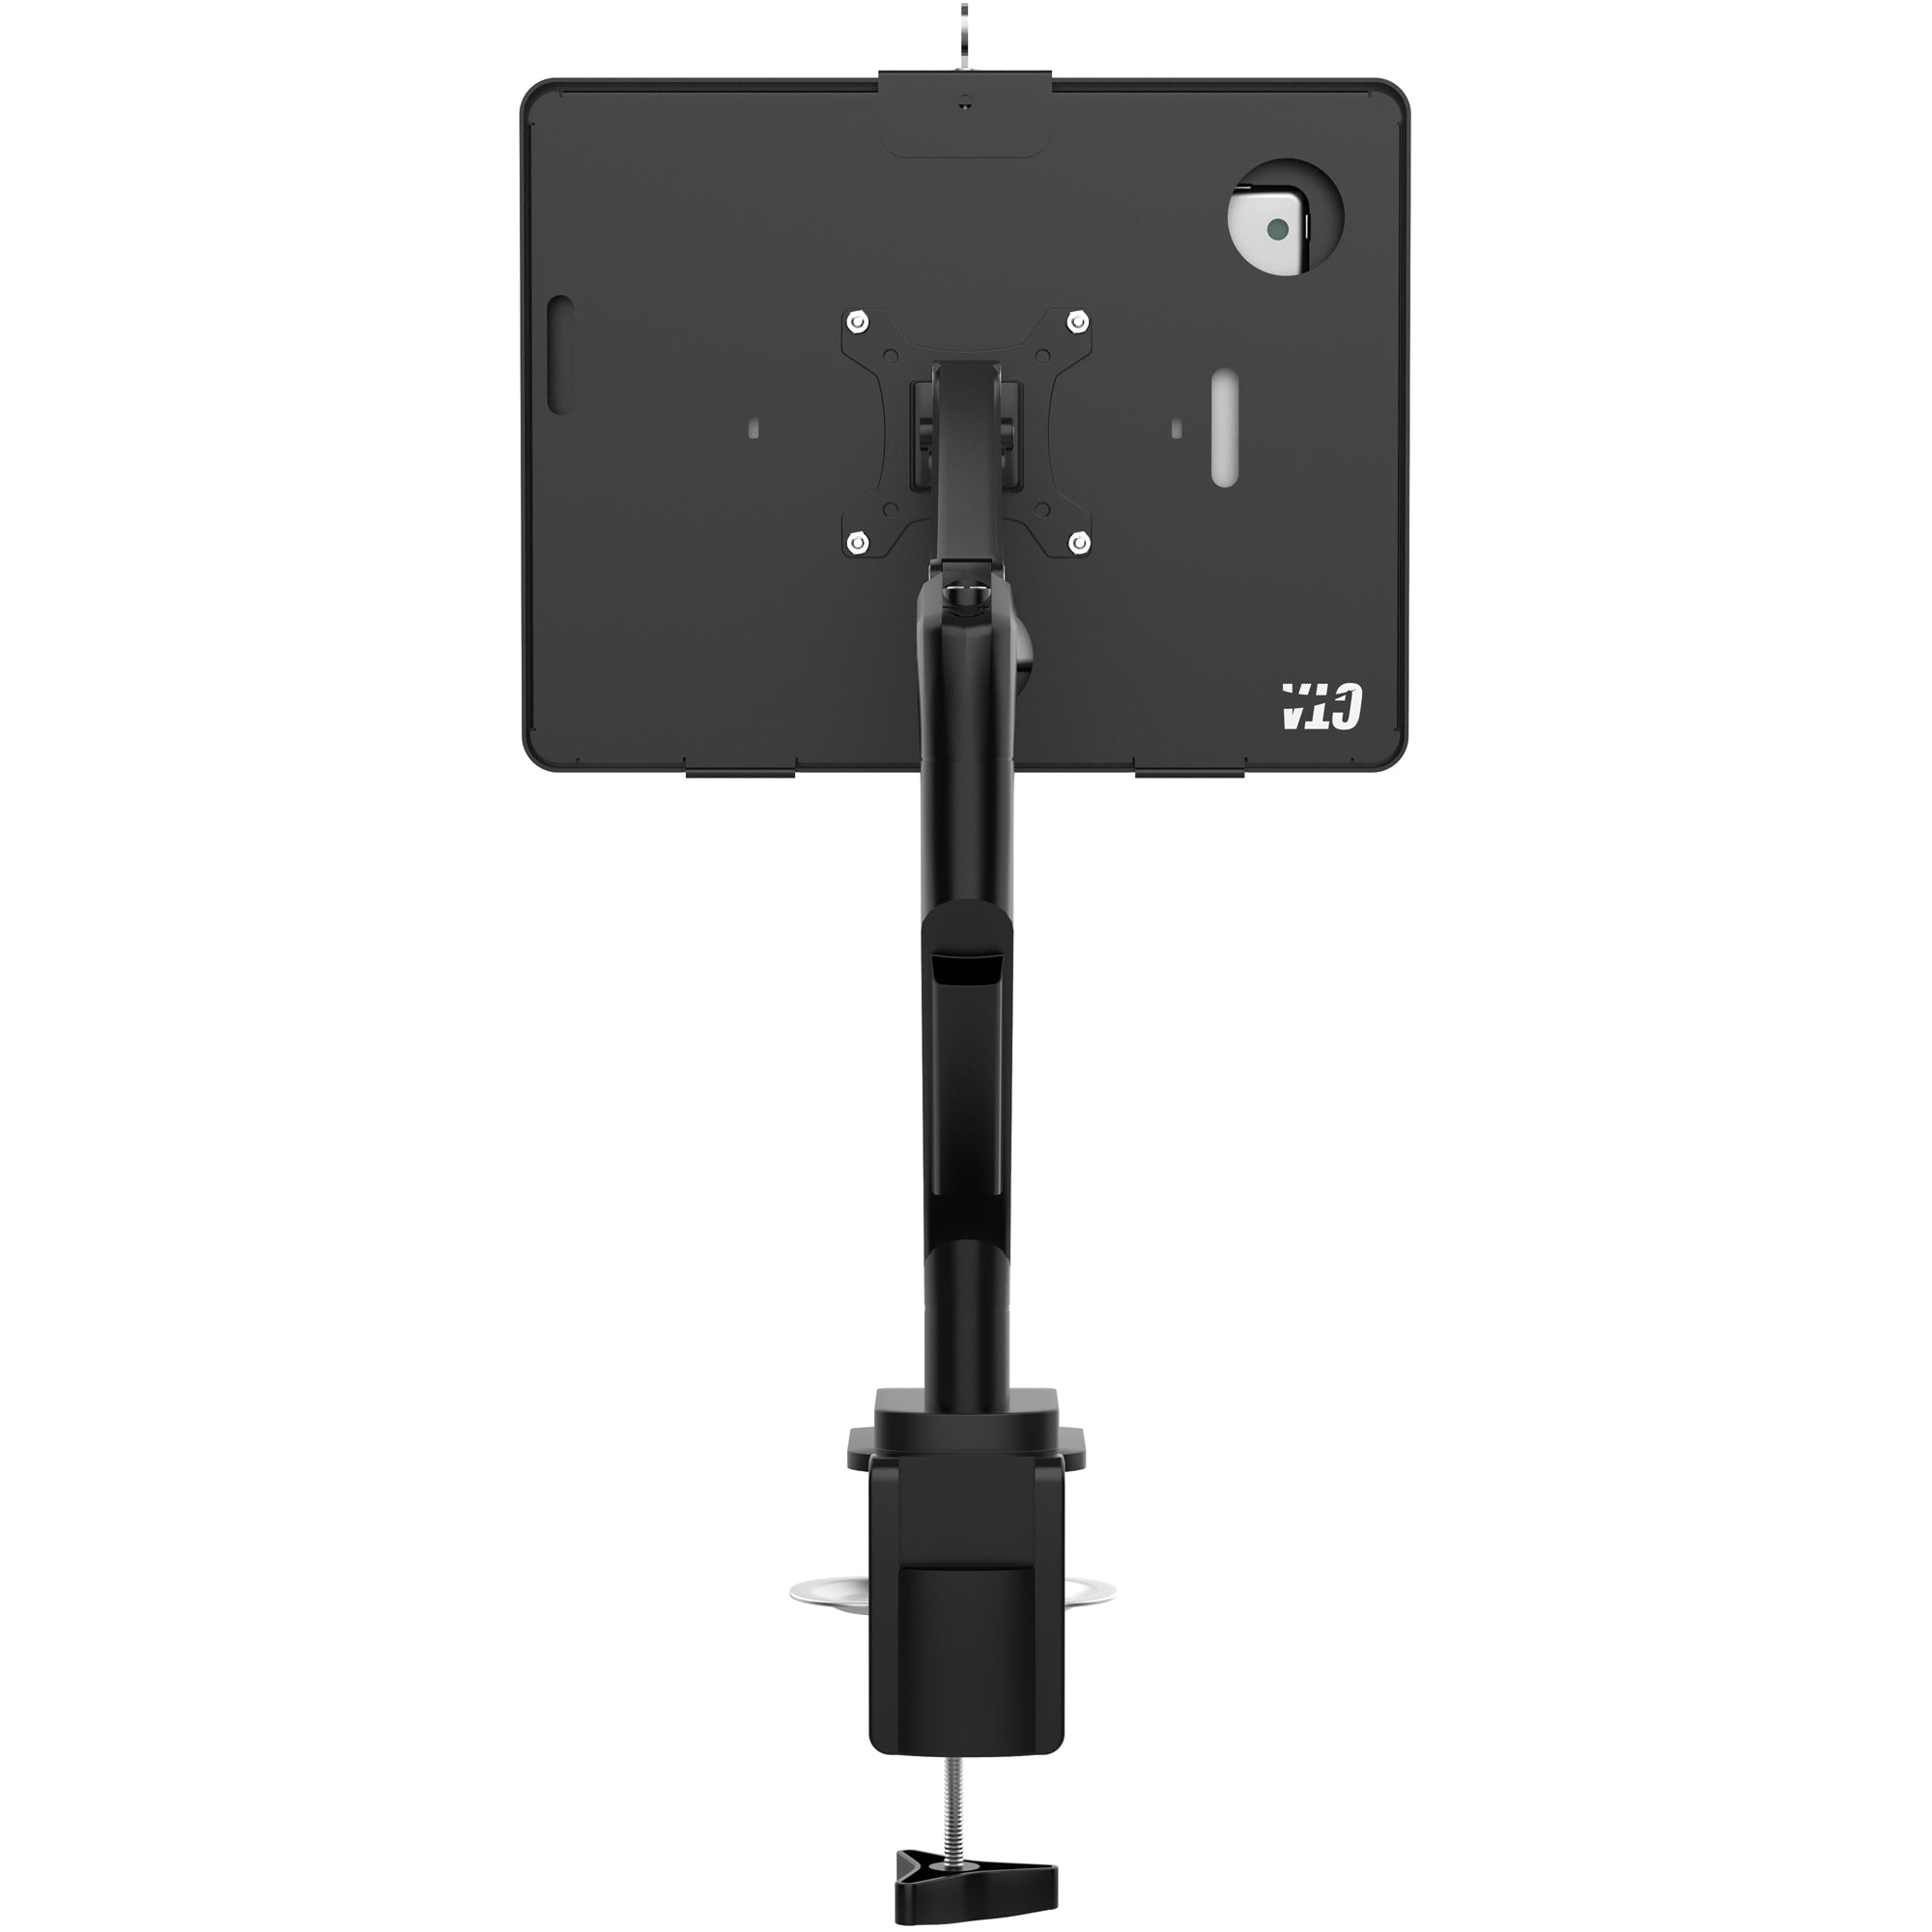 Locking Tablet Mount and USB Hub w/ Full Cable Management w/ Paragon Enclosure